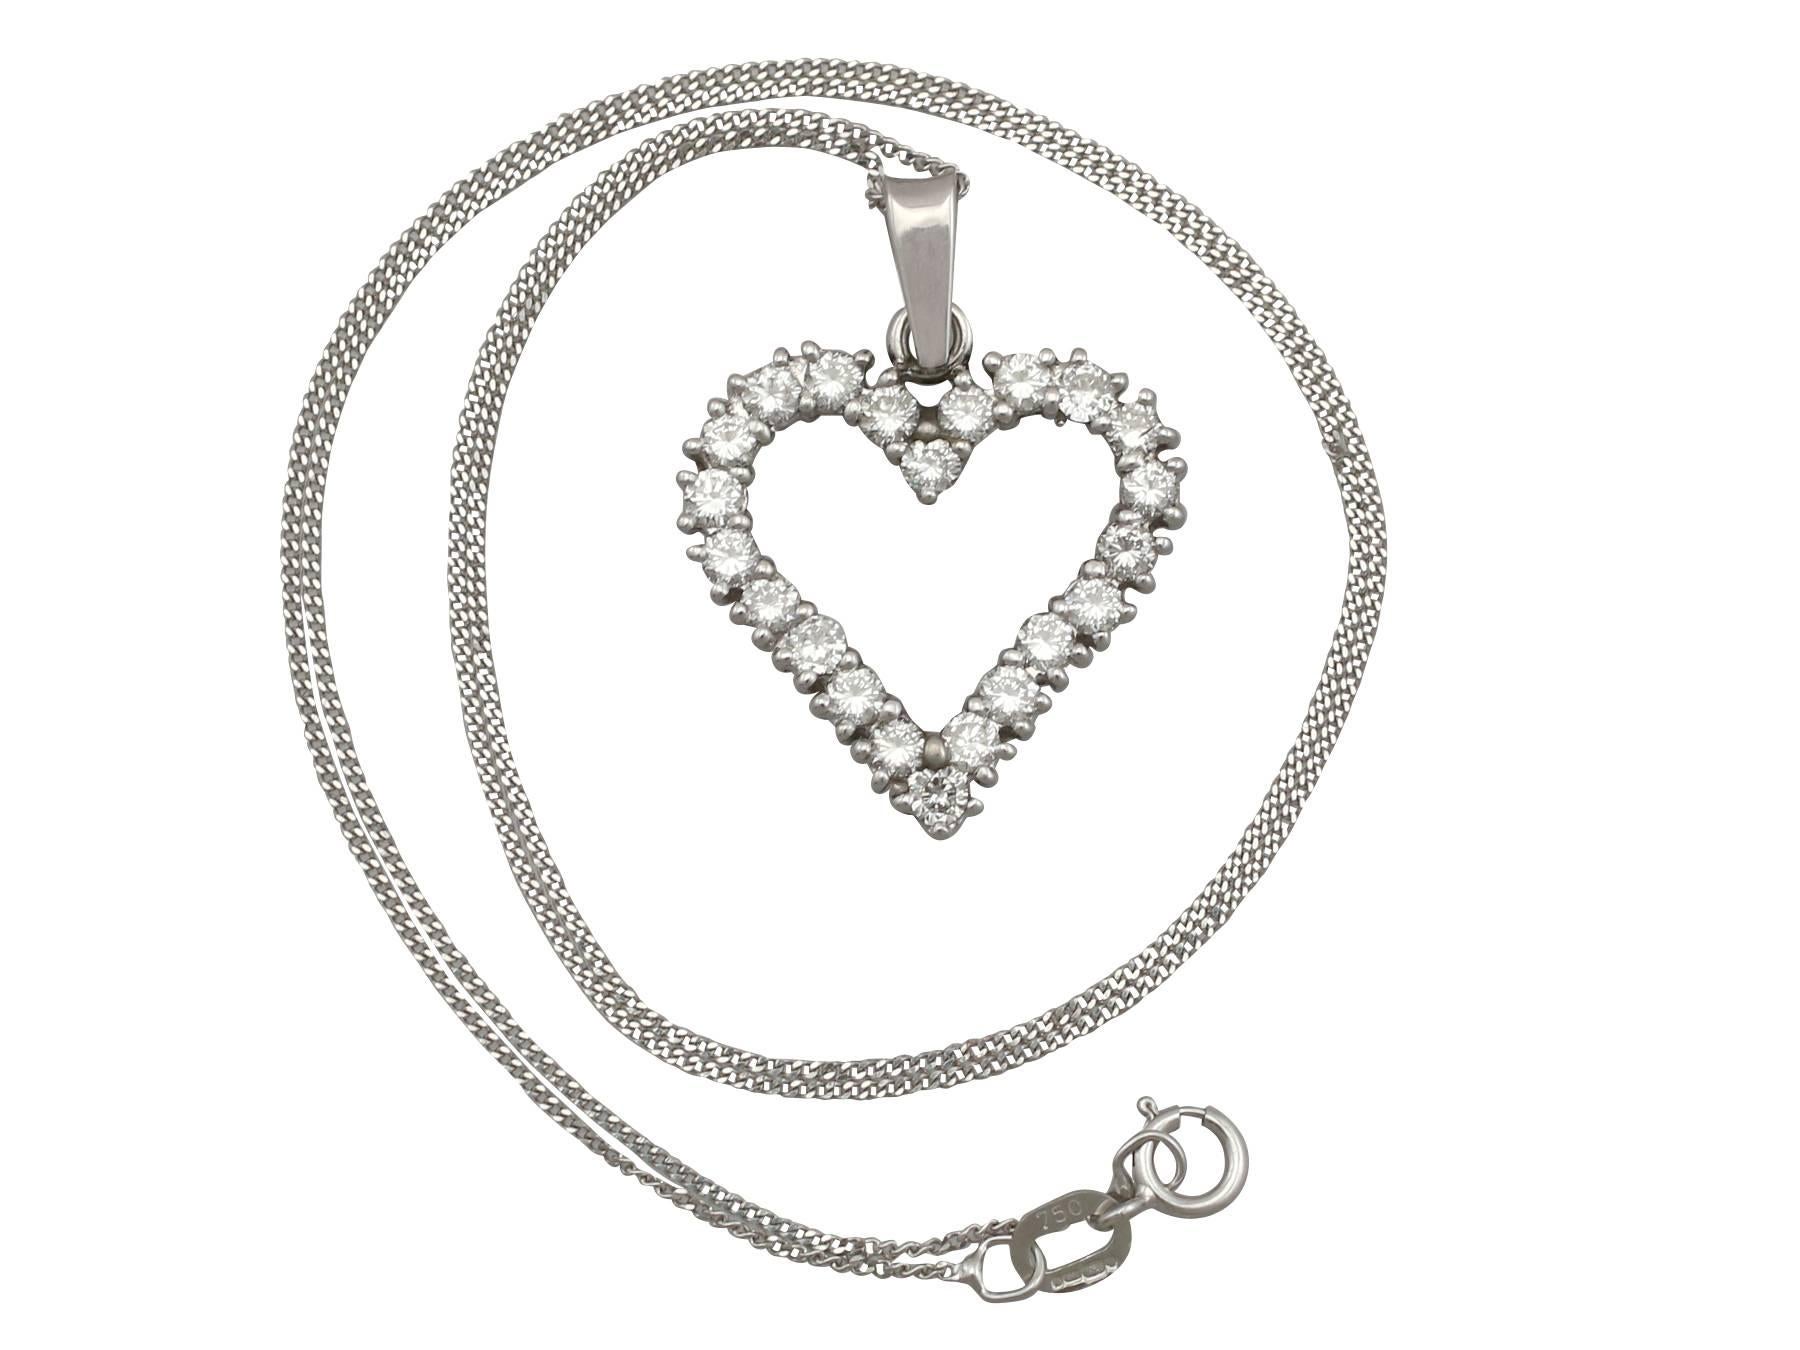 An impressive 1.05 carat diamond and 18 carat white gold heart pendant; part of our diverse vintage jewellery and estate jewelry collections.

This fine and impressive vintage heart pendant has been crafted in 18 ct white gold.

The pierced